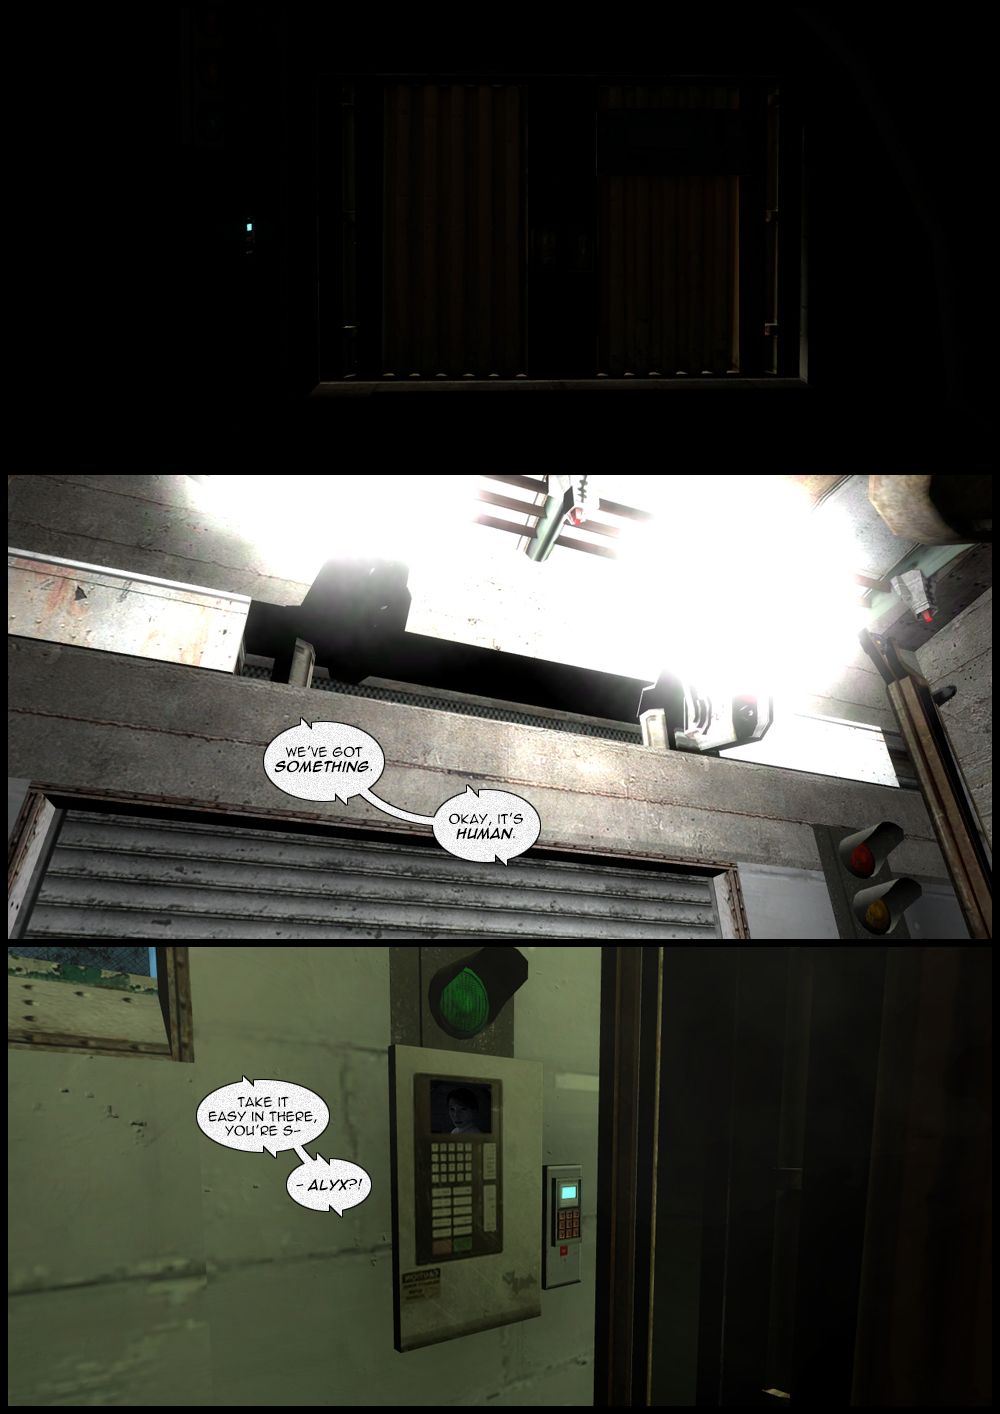 The decontamination chamber is locked and goes dark, then lights appear on the ceiling as cameras pop out of the wall and a voice says they've got something. Alyx approaches a screen where Doctor Mossman can be seen. Mossman's voice starts to say to take it easy in there, then cuts herself off as she realizes it's Alyx.